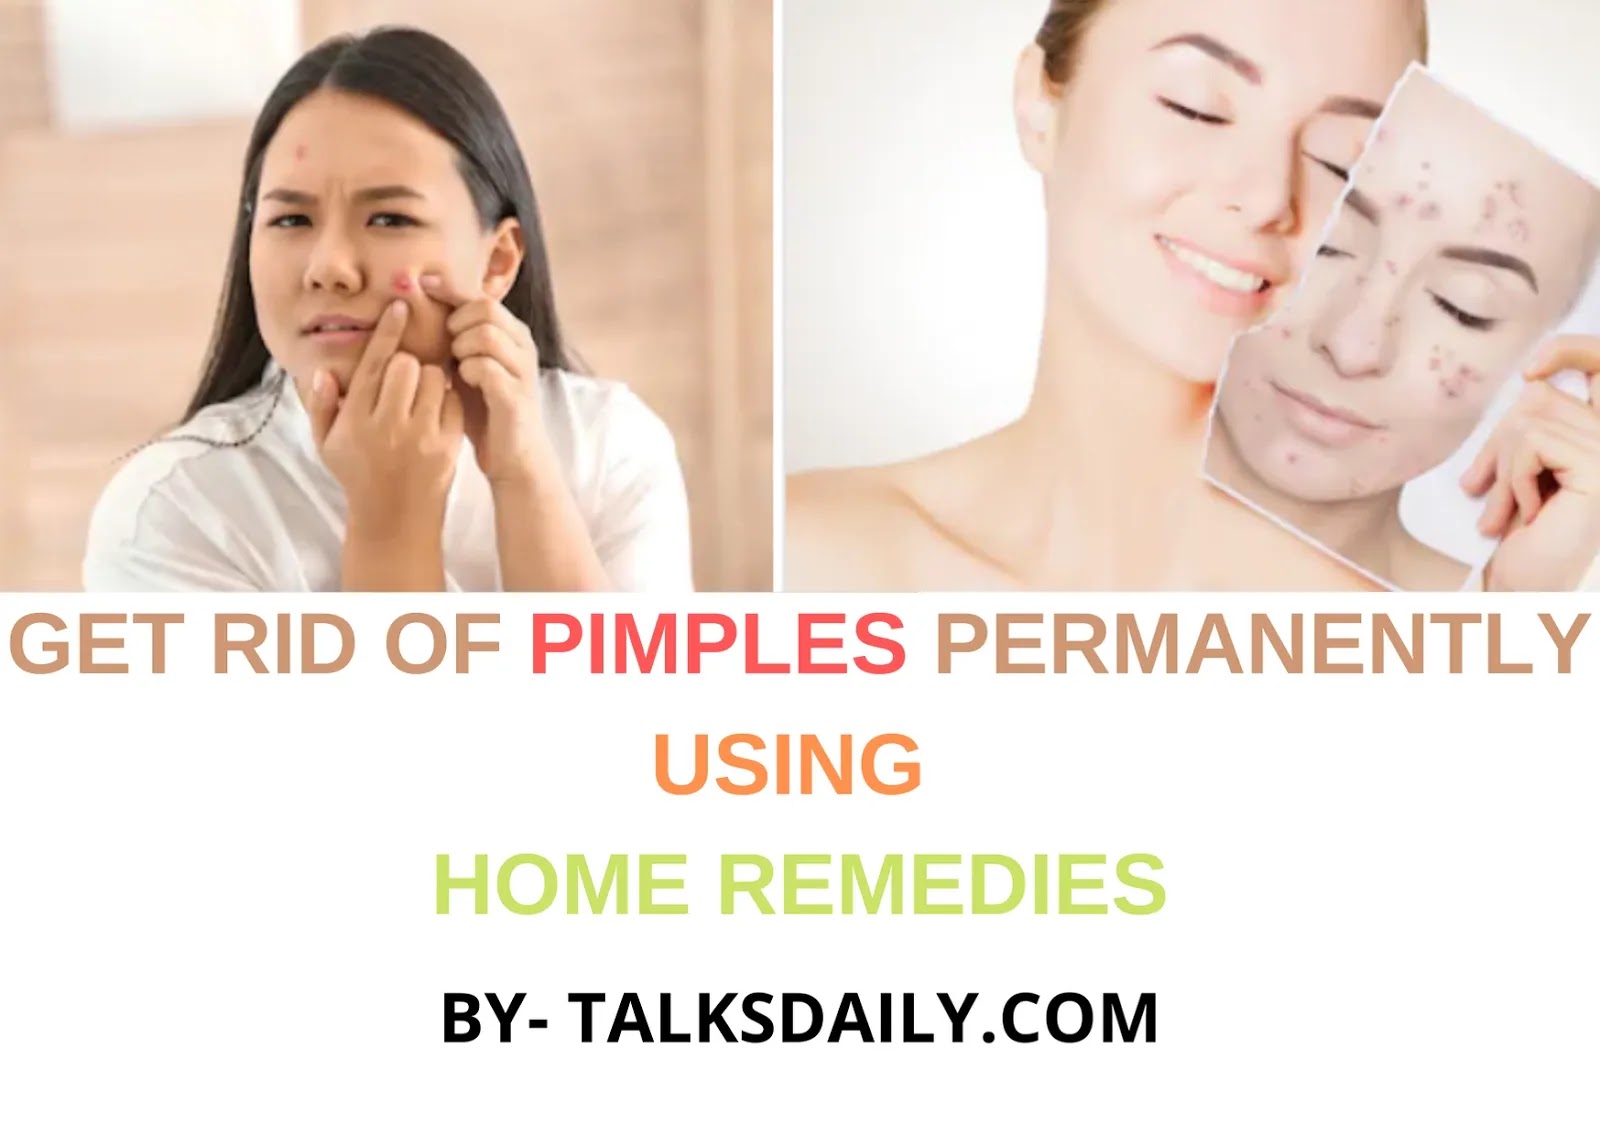 How To Get Rid Of Pimples Permanently Using Home Remedies